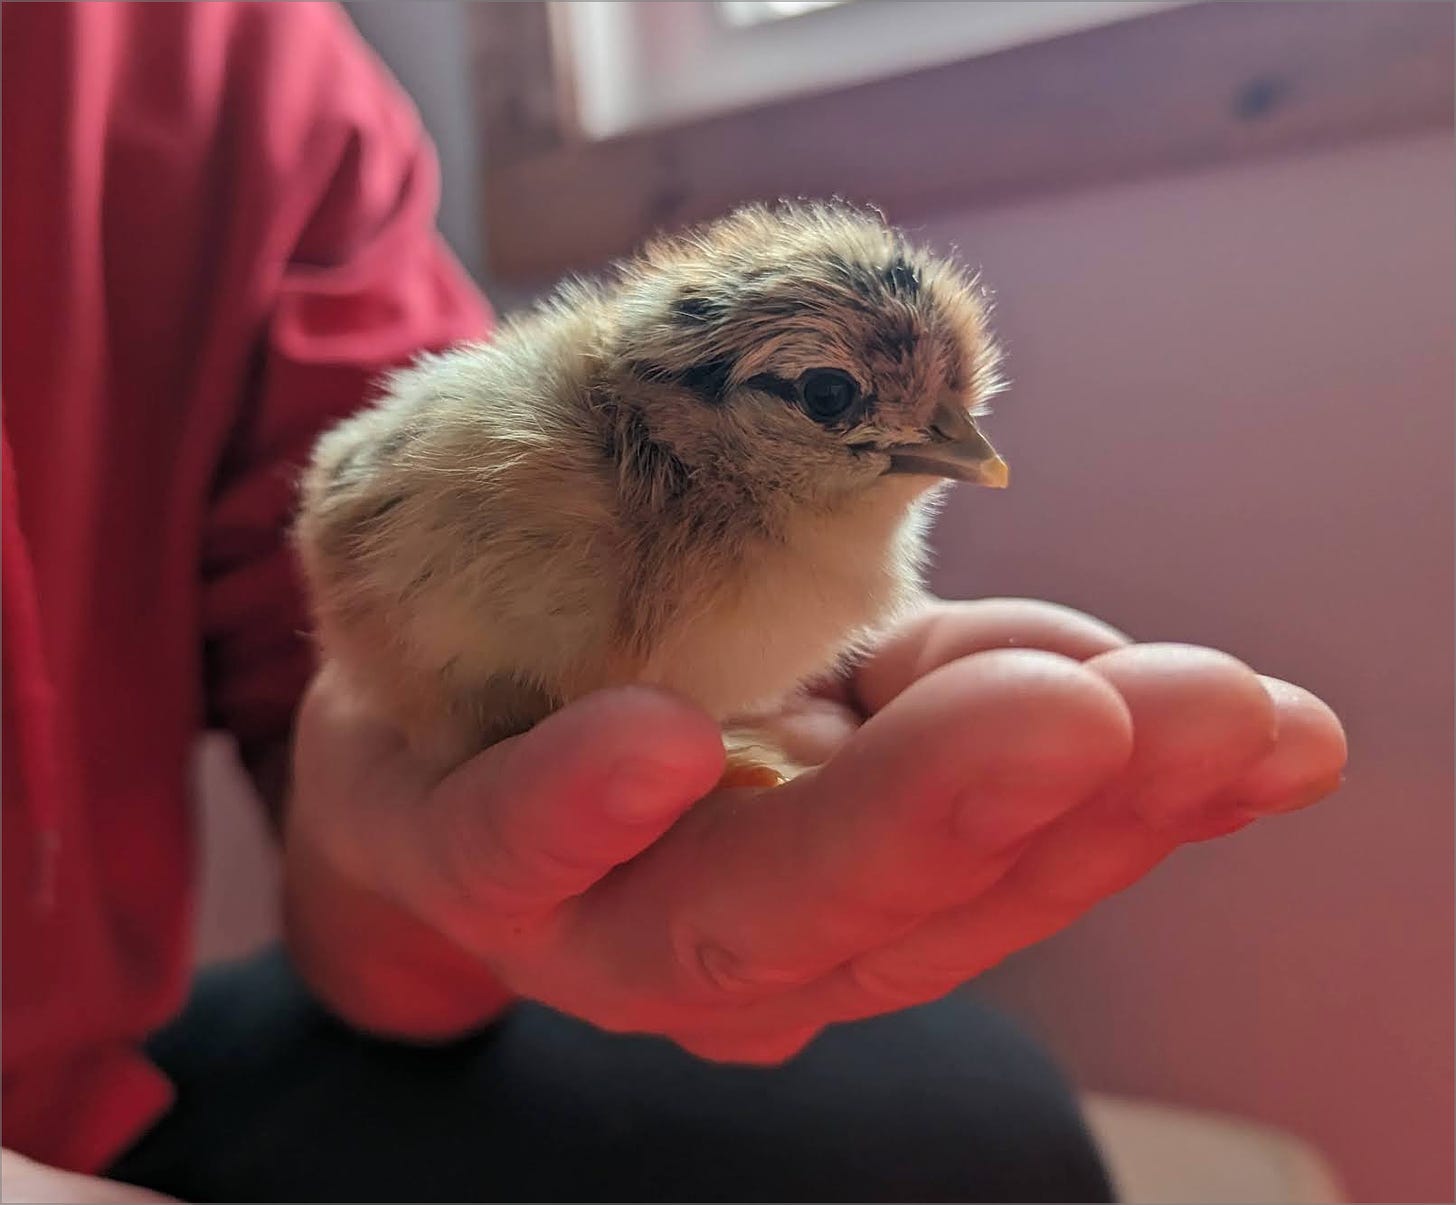 Man holding small newly hatched chicken